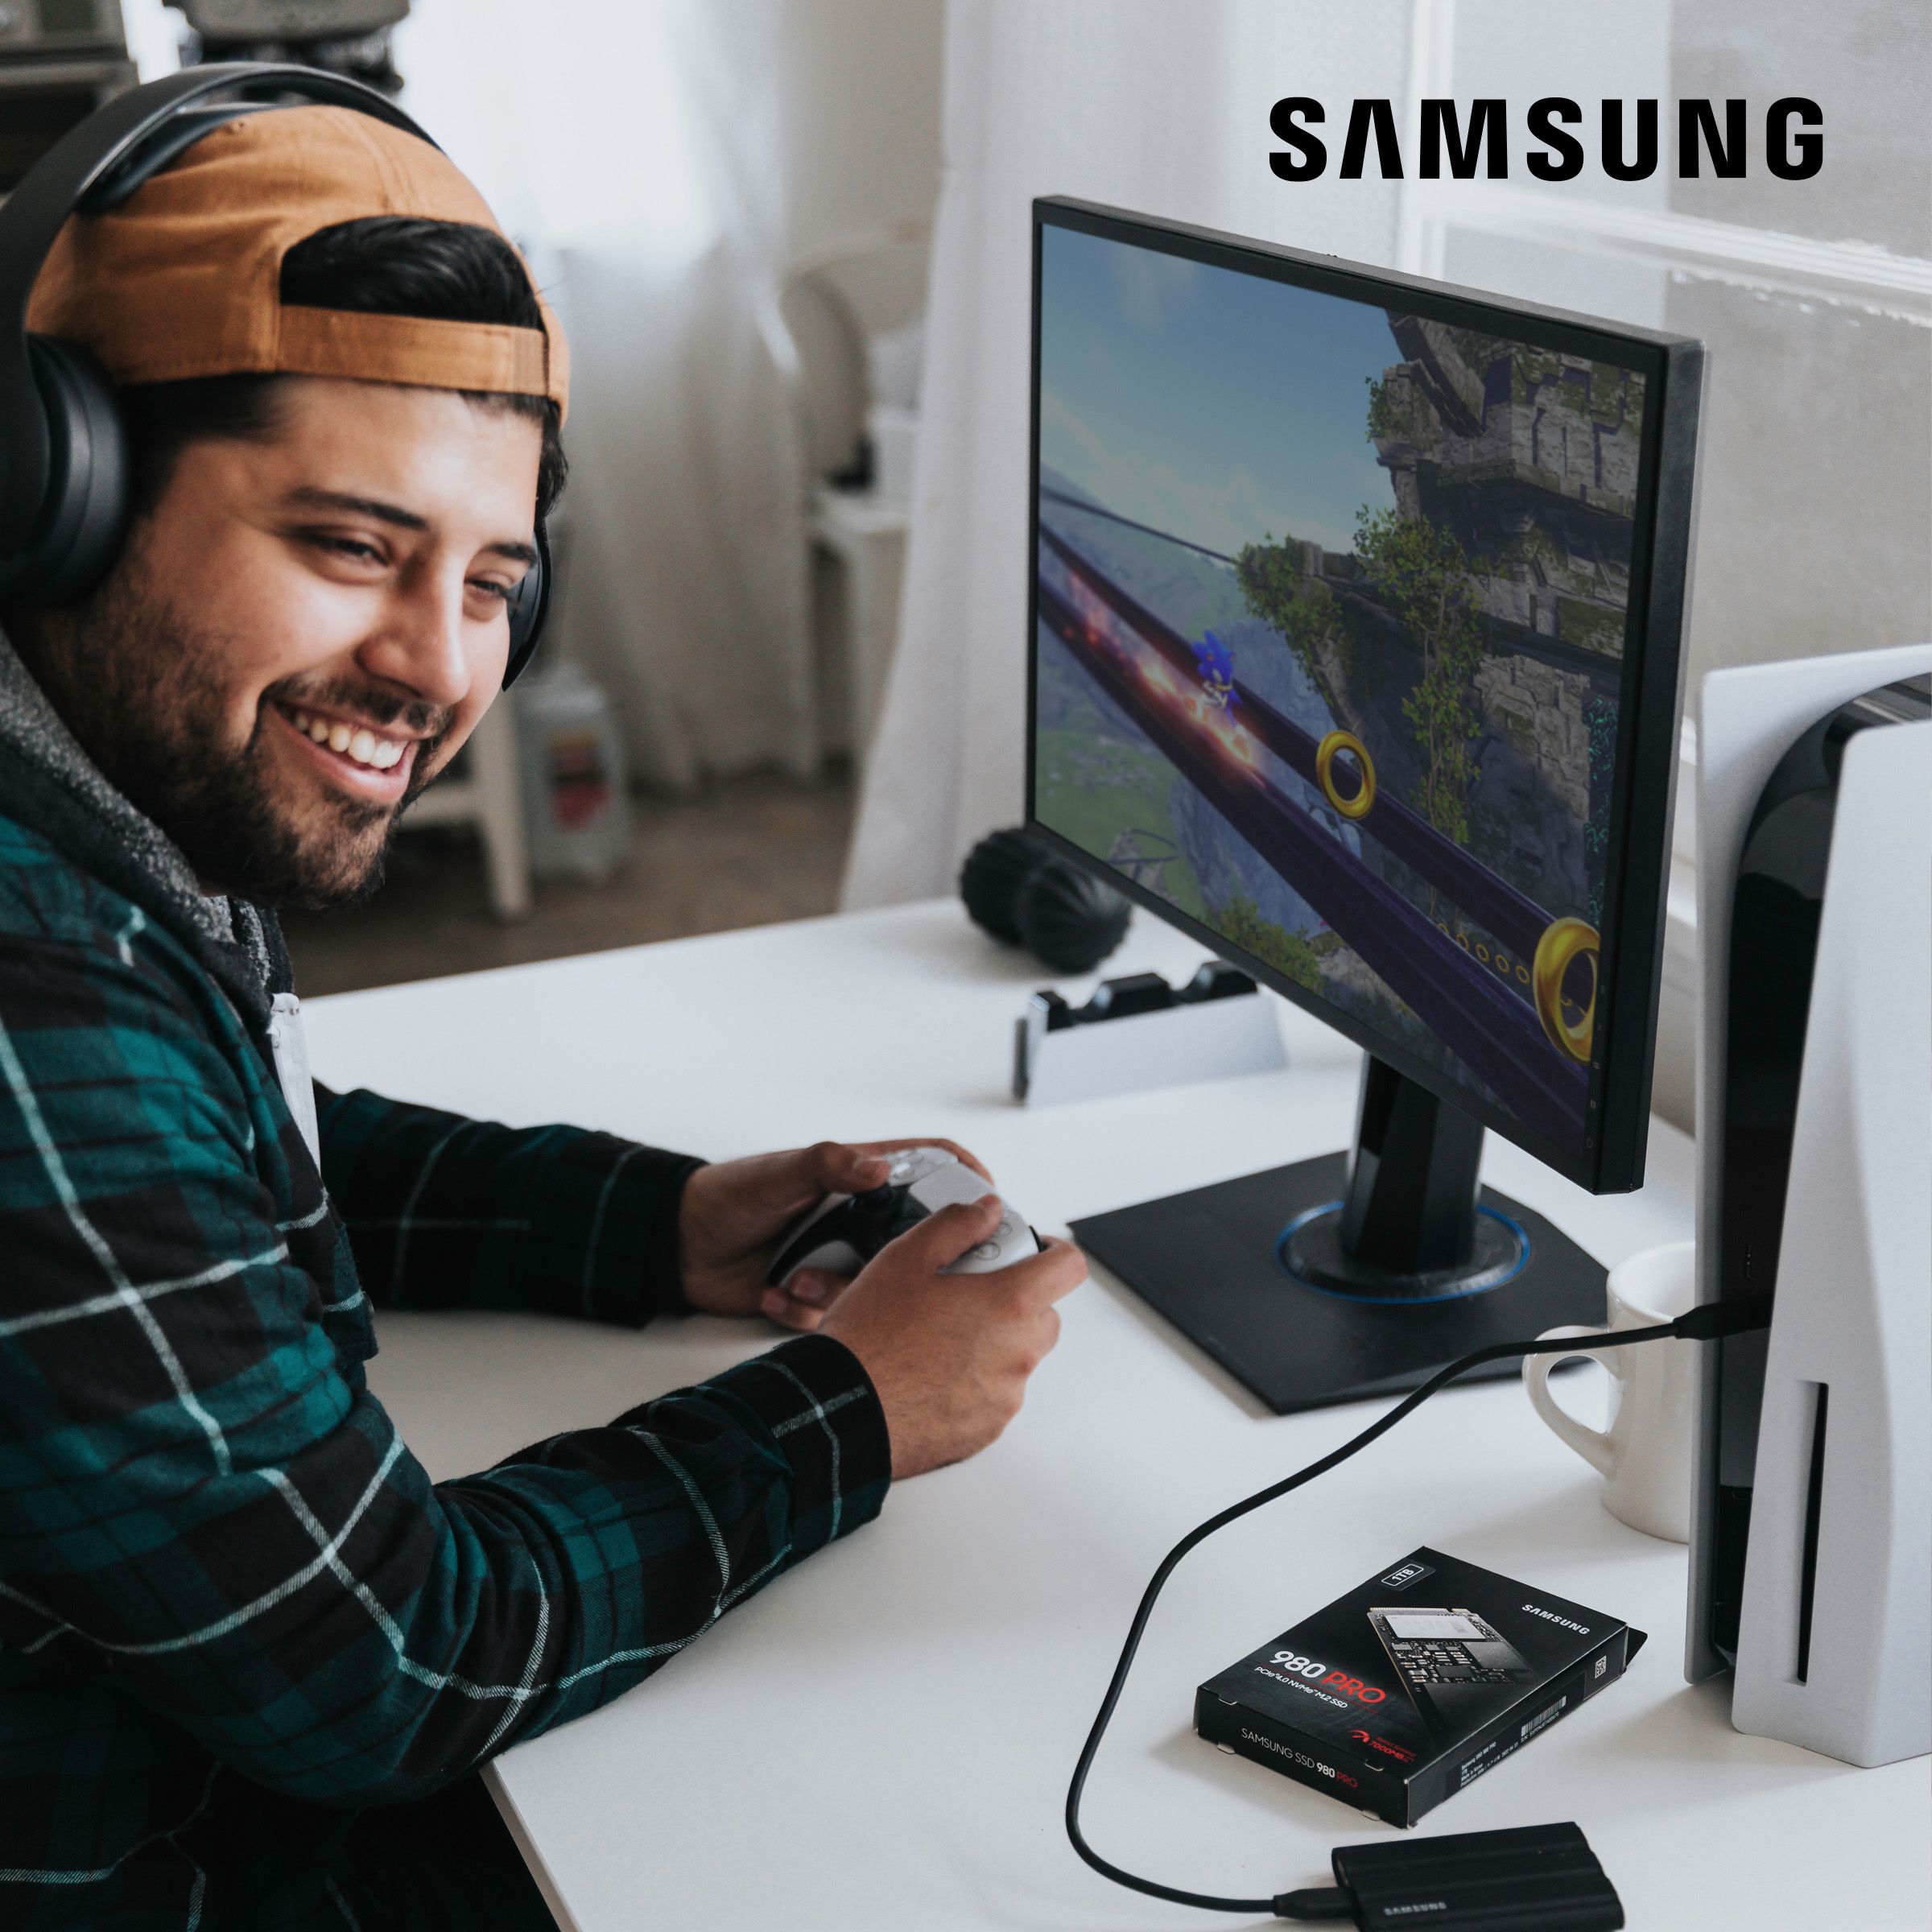 Samsung storage offers a wide range of products to boost your gaming experience.